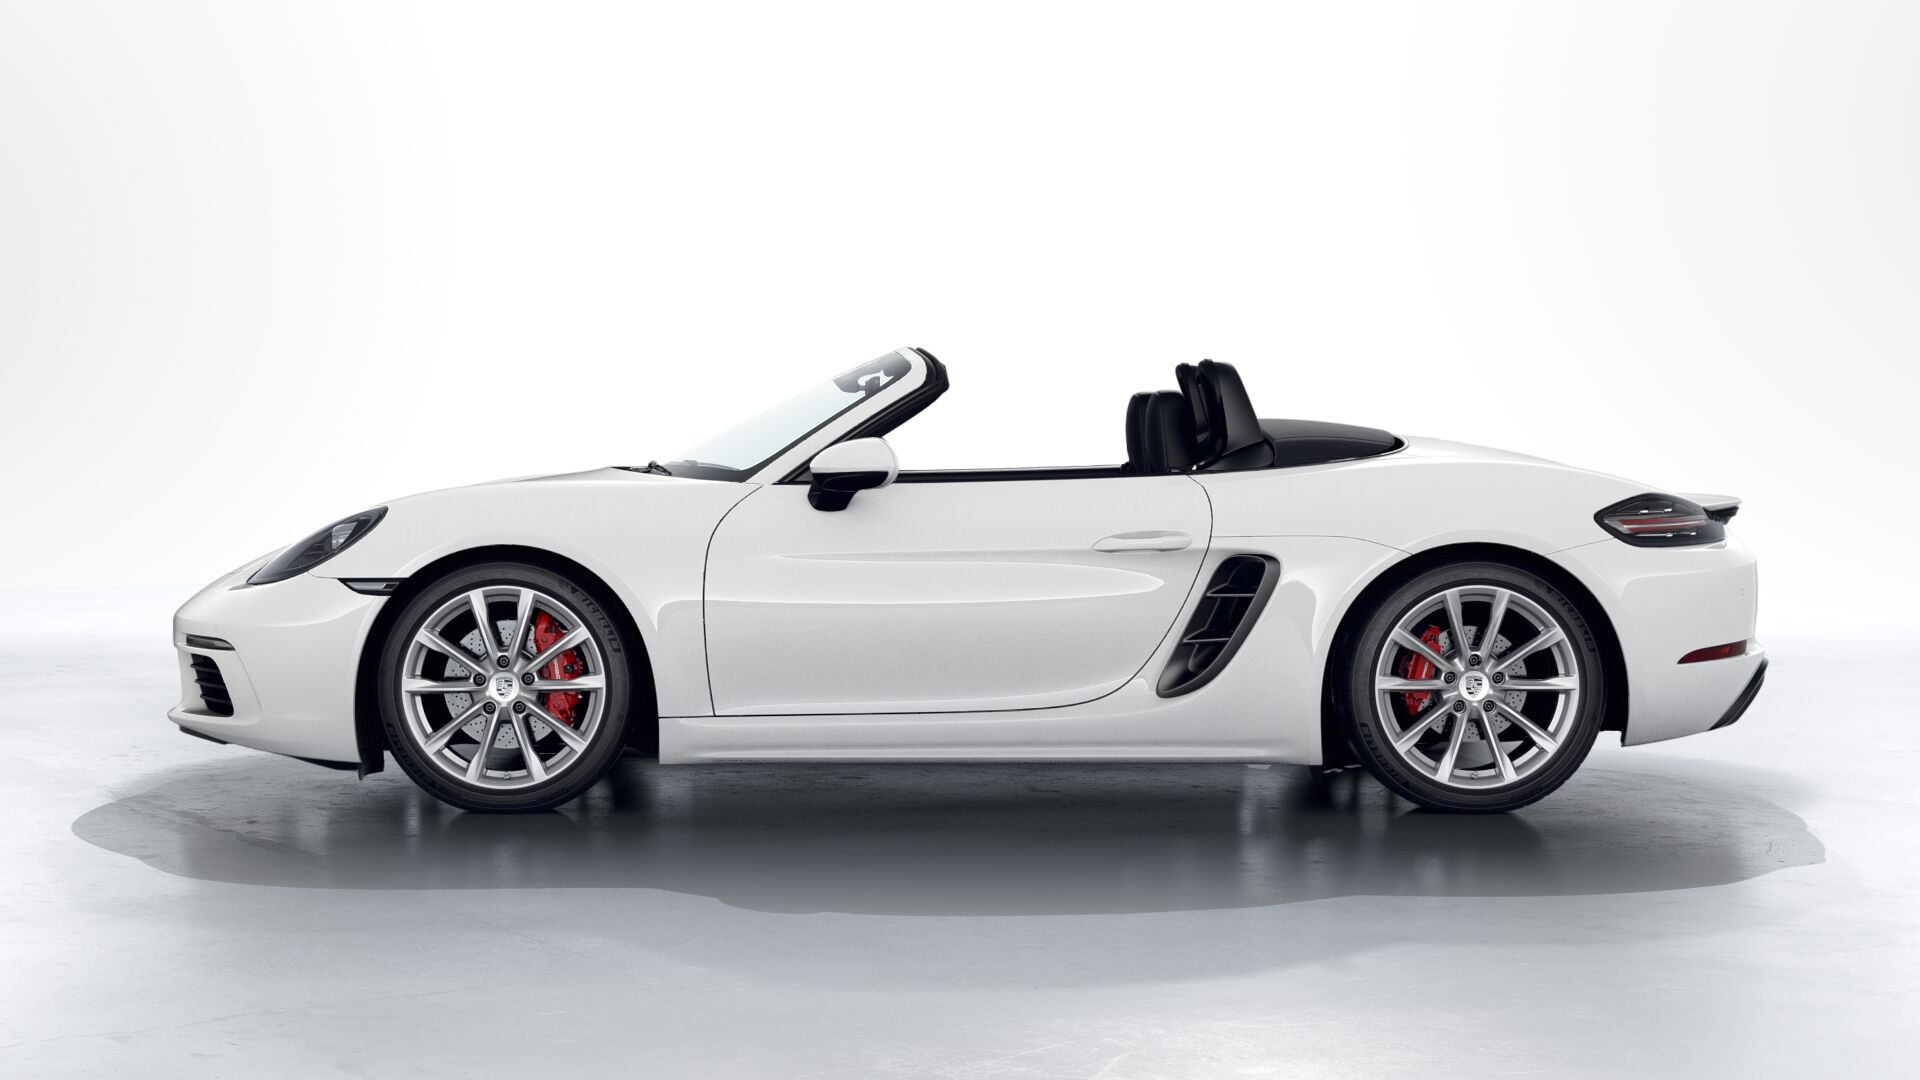 Exterior view of 718 Boxster S